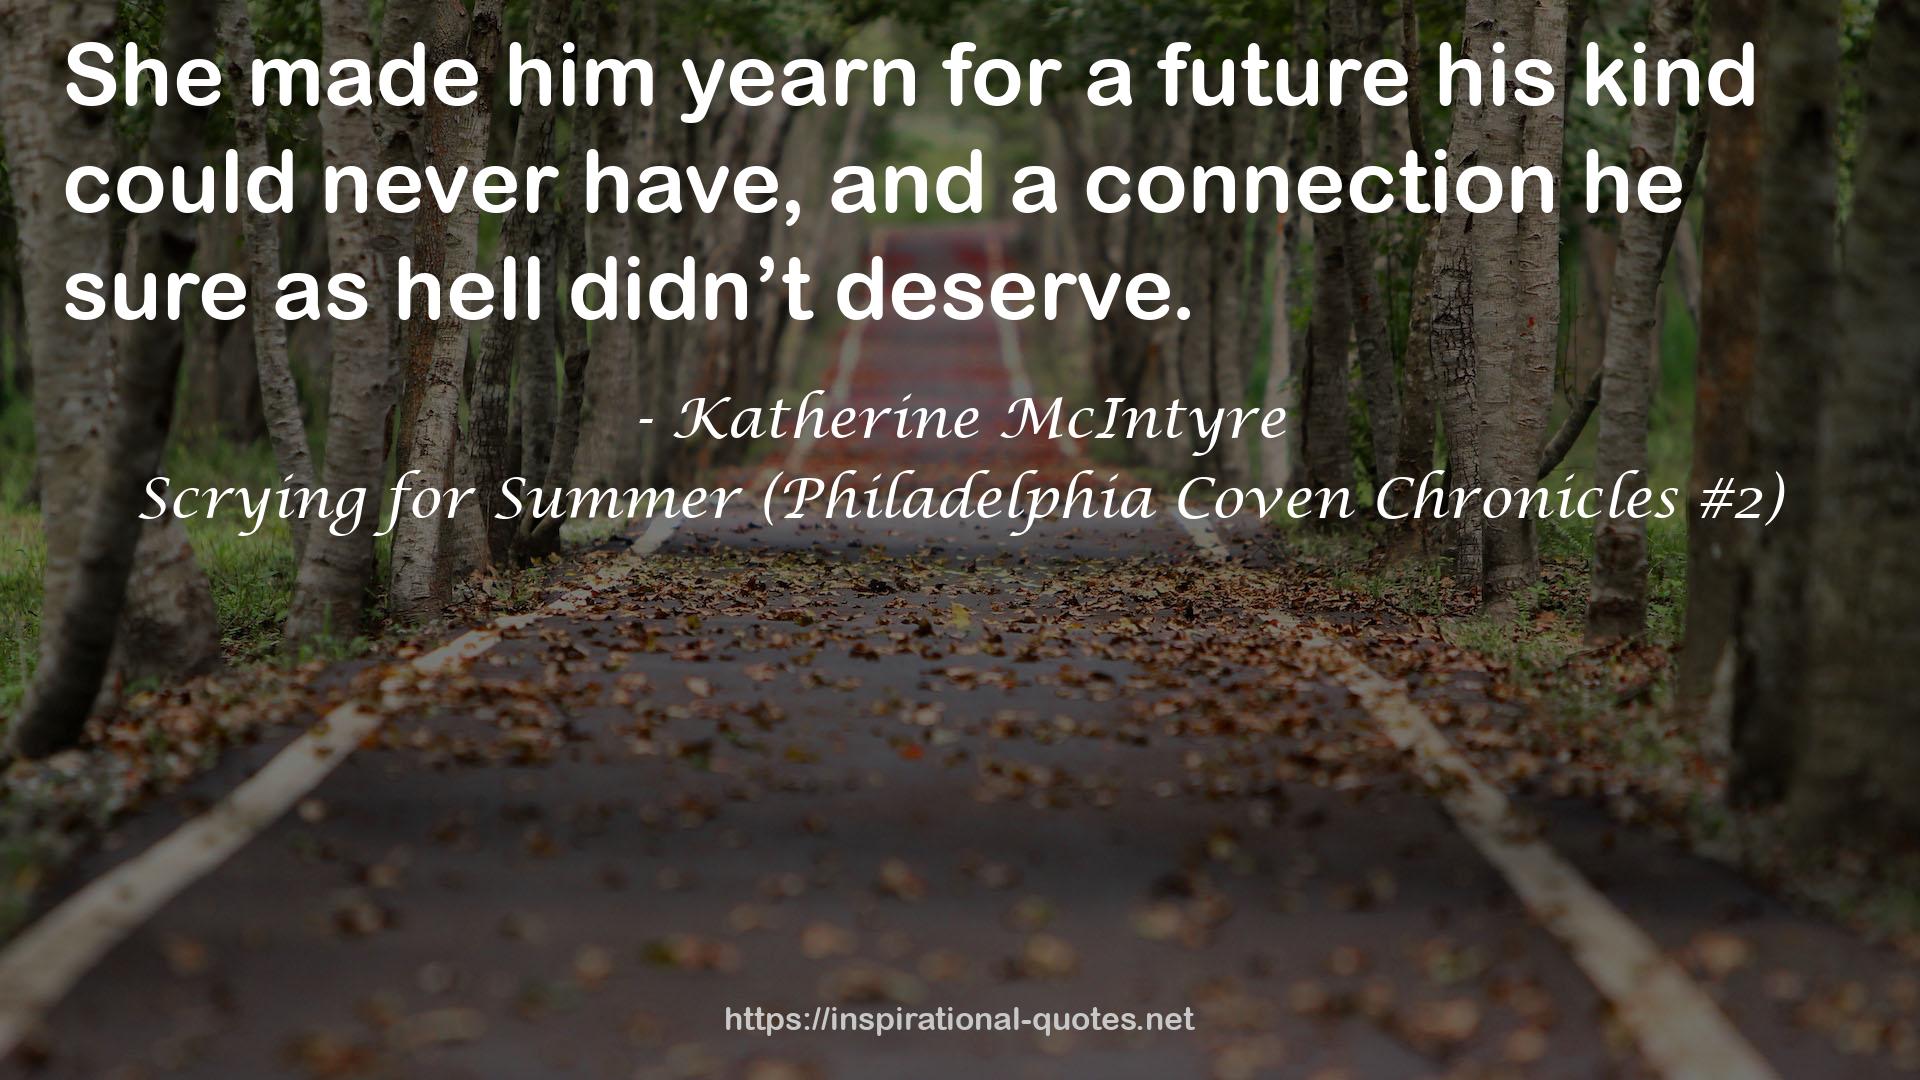 Scrying for Summer (Philadelphia Coven Chronicles #2) QUOTES